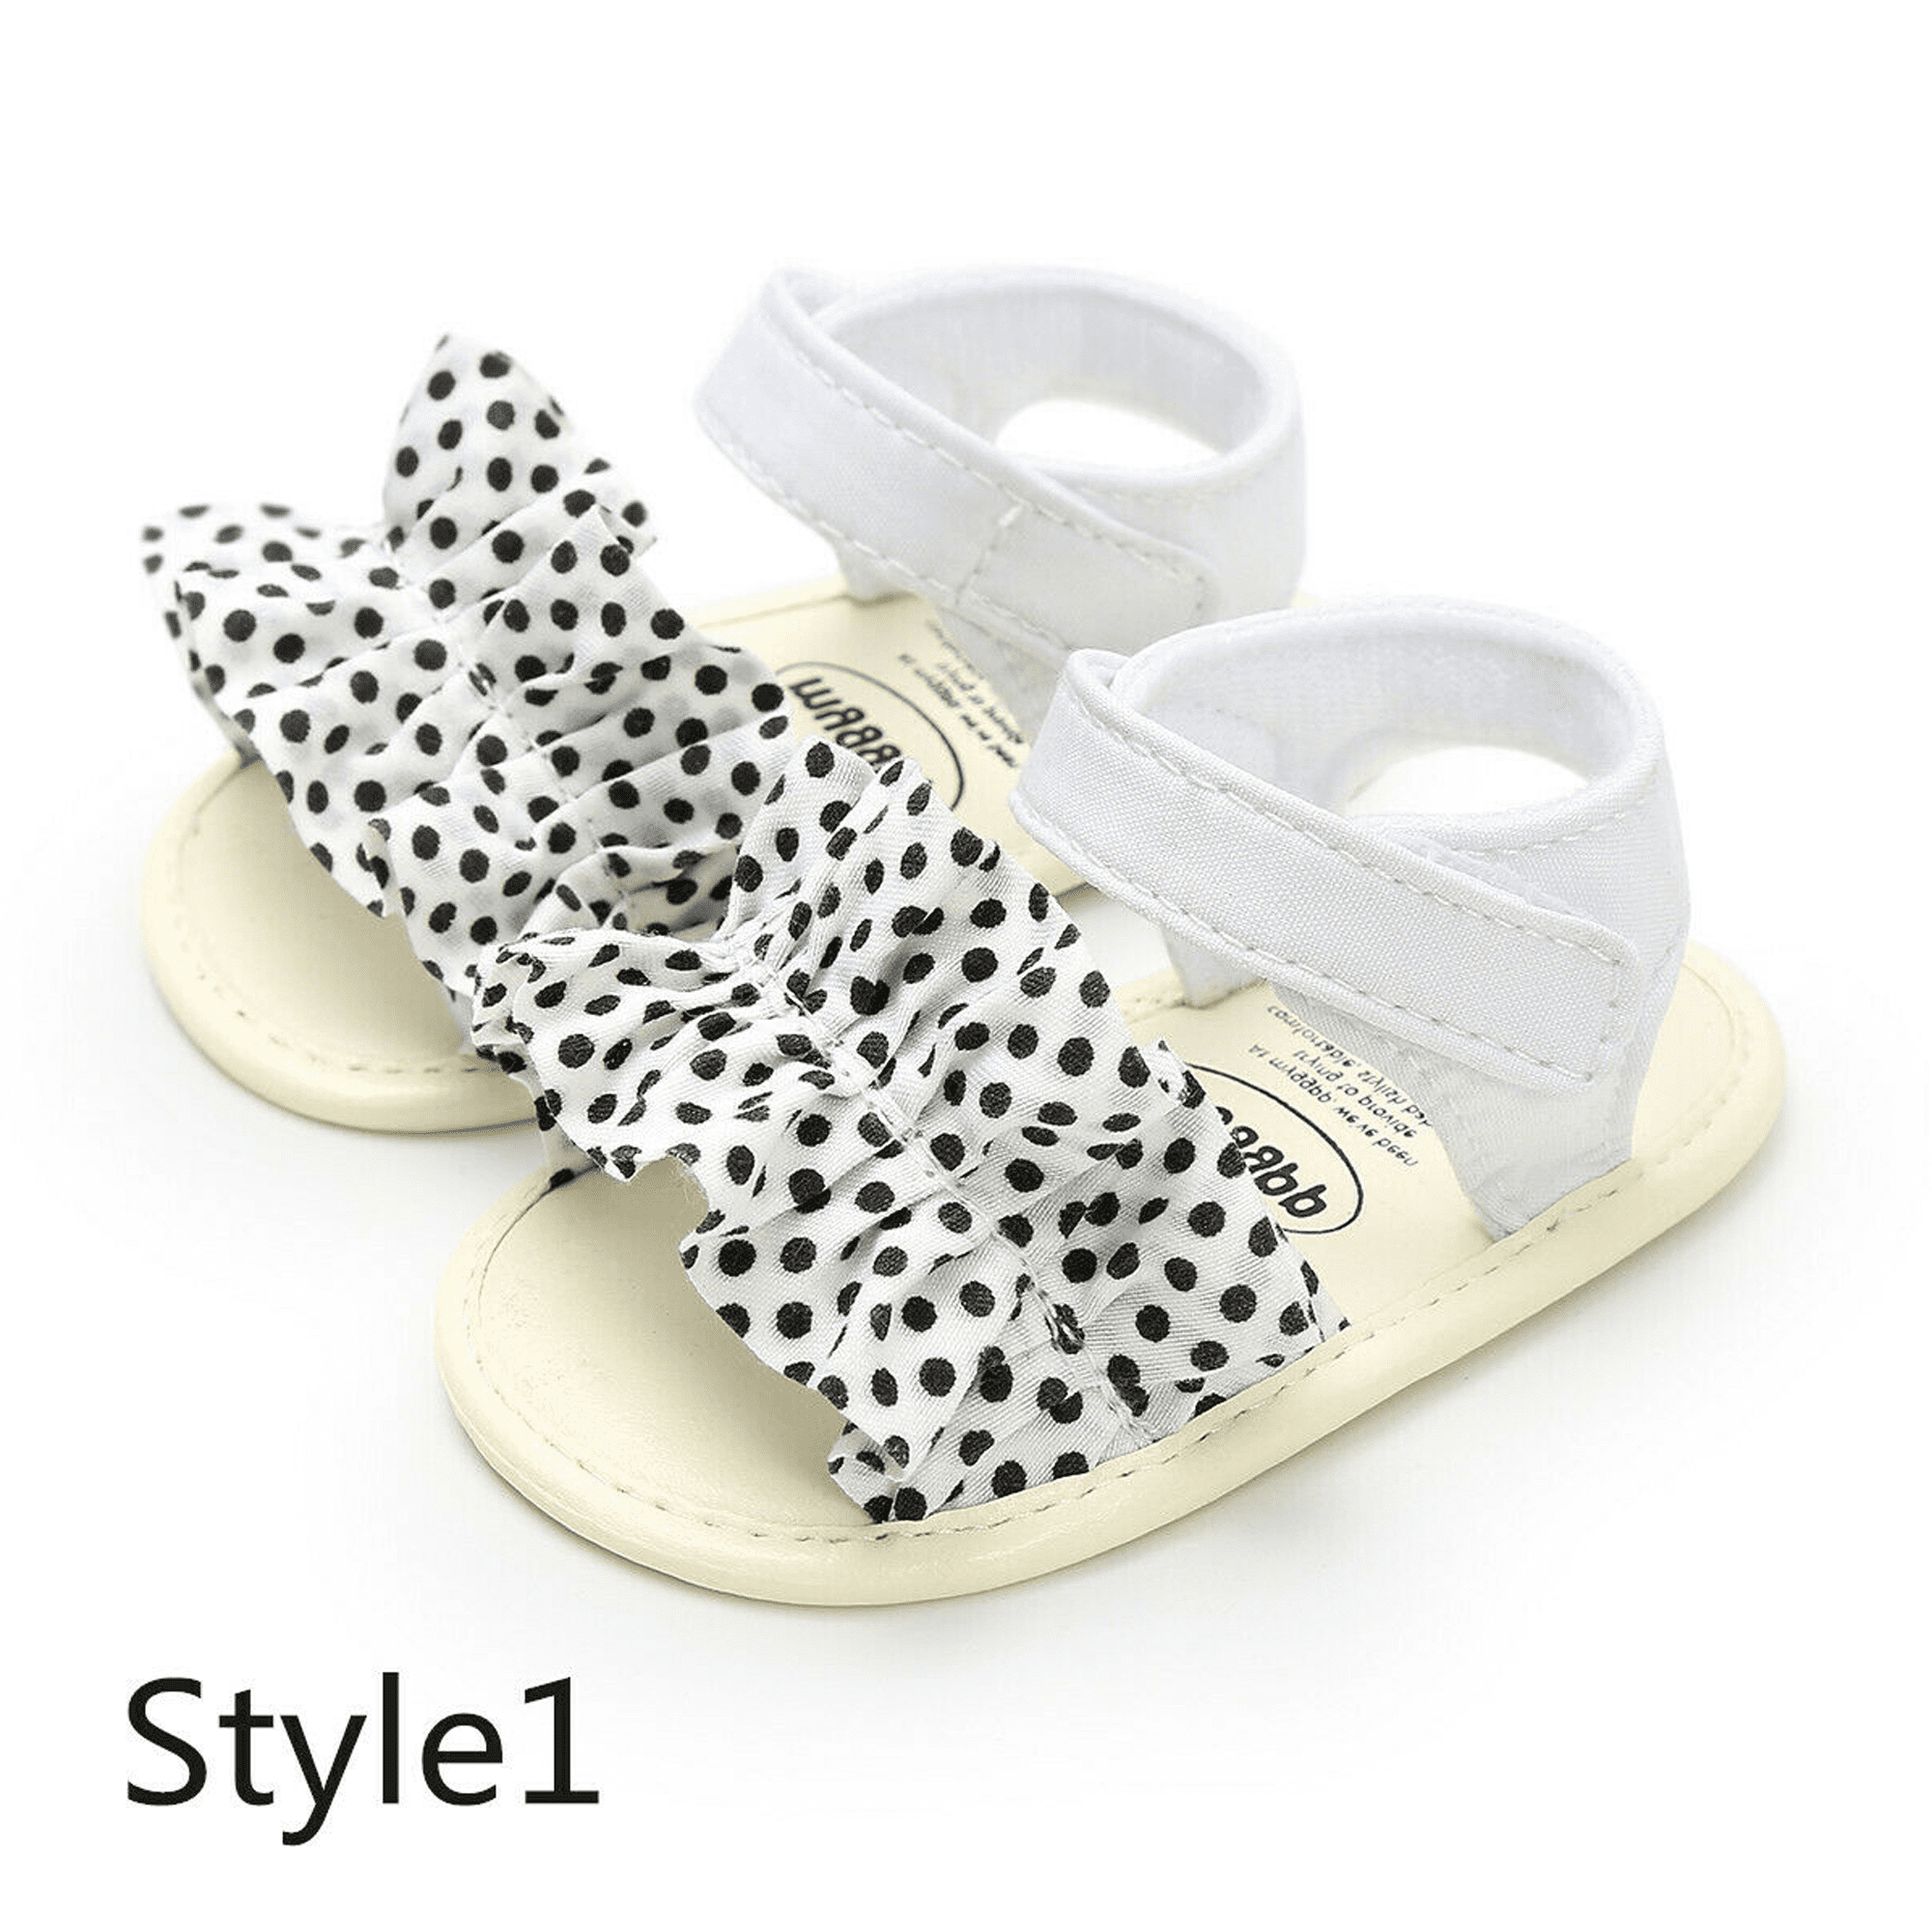 Newborn Baby Girl Soft Sole Crib Shoes Infant Toddler Summer Sandals Size 4-9 